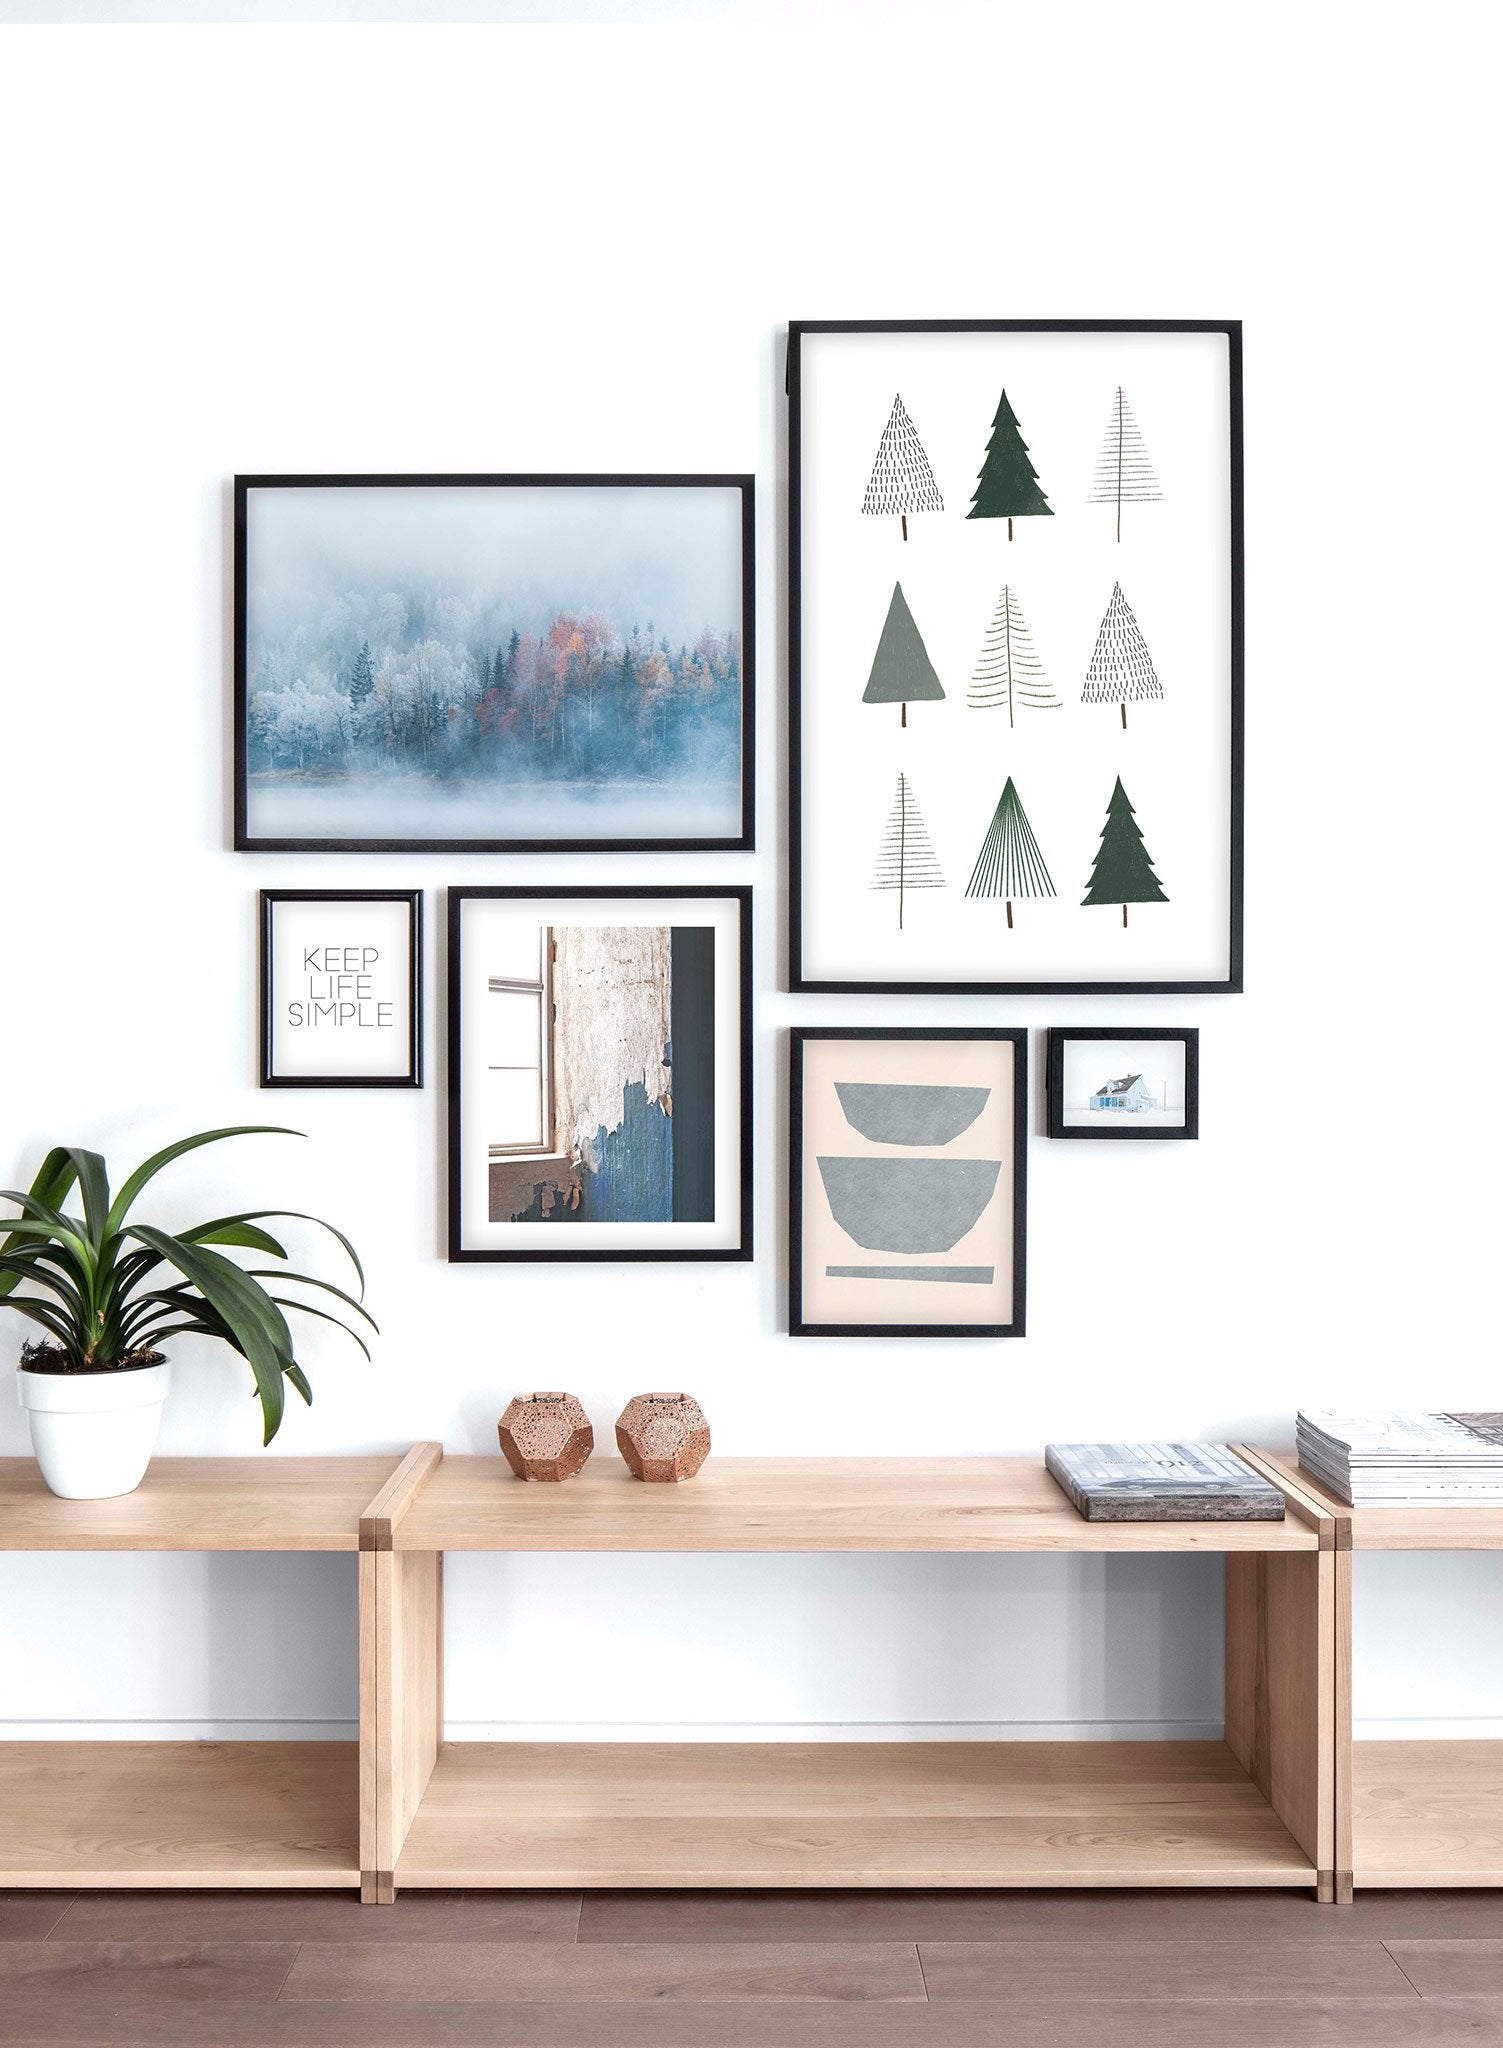 Landscape photography poster by Opposite Wall with trees in the mist - Lifestyle Gallery - Living Room